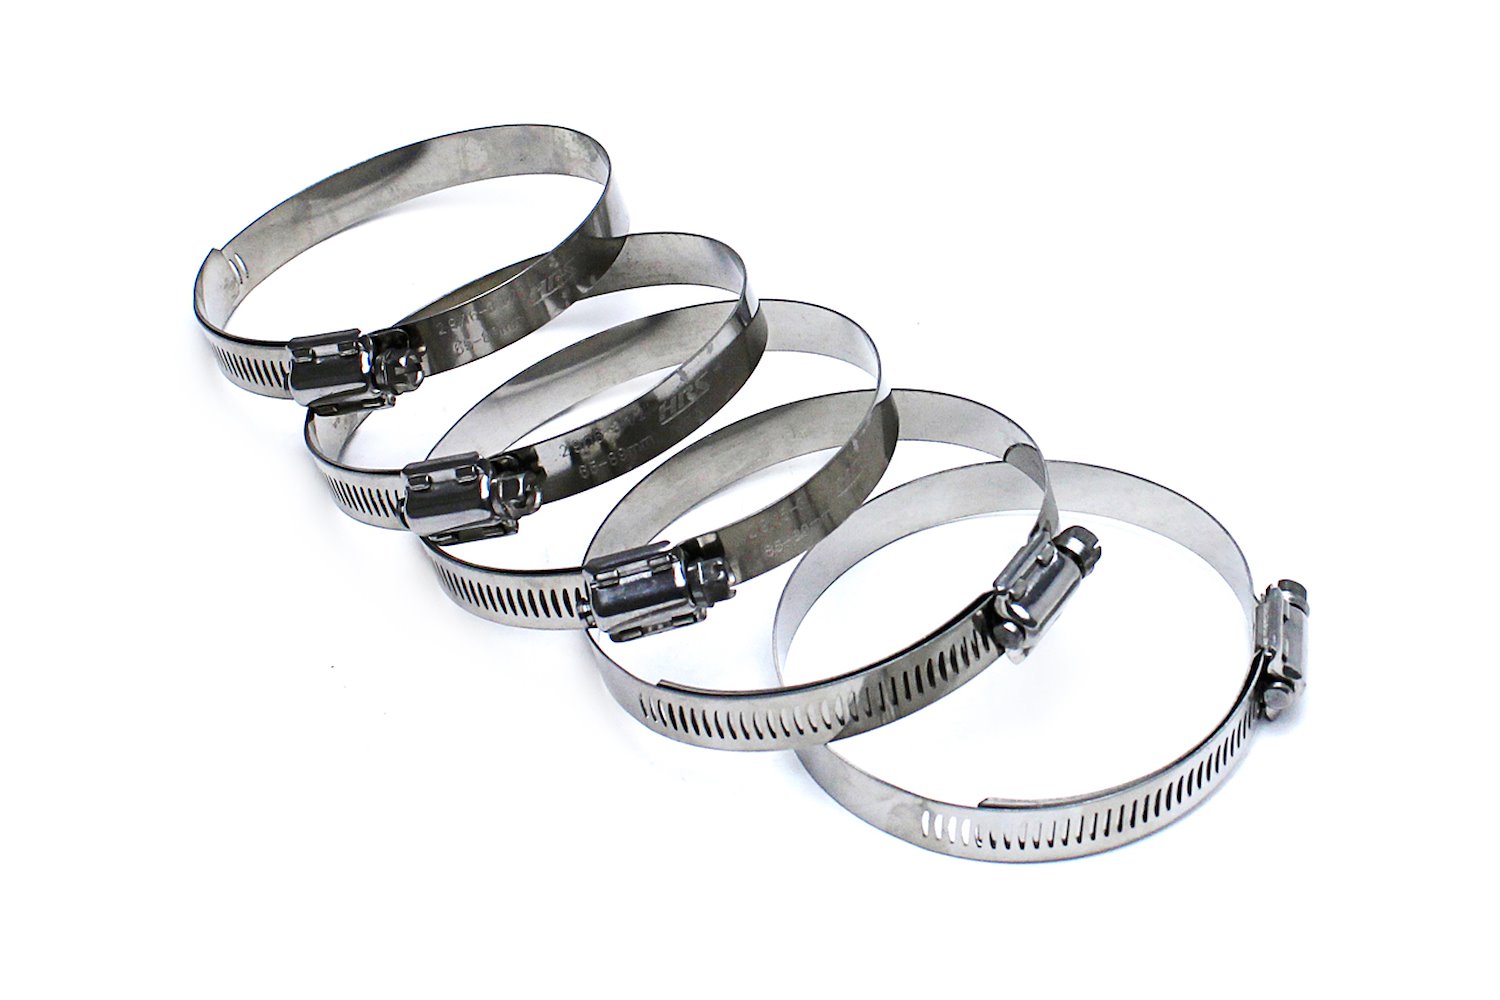 SSWC-78-102x5 Stainless Steel Worm Gear Hose Clamp, Effective Range: 3-1/16 in.- 4 in., 5Pc